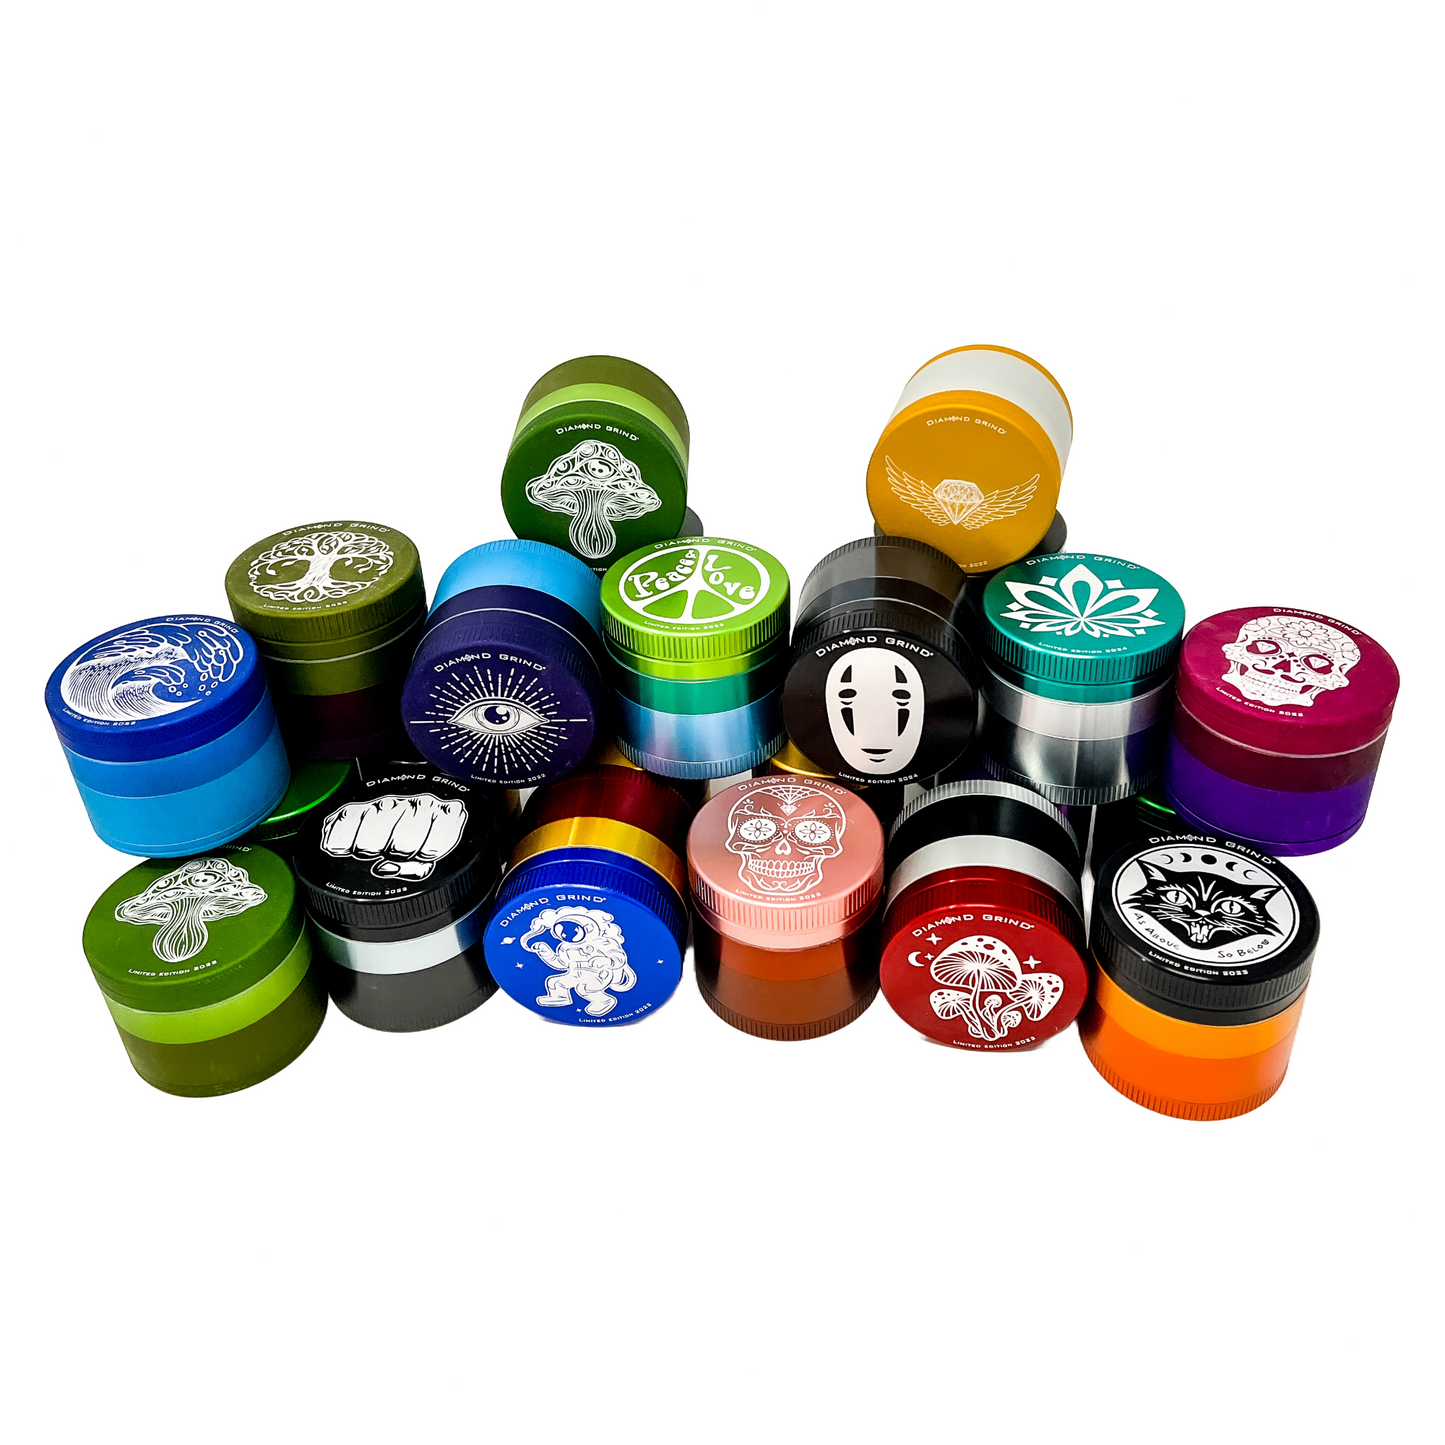 Diamond Grind Limited Edition Herb Grinder 56mm - 5th batch, numbered